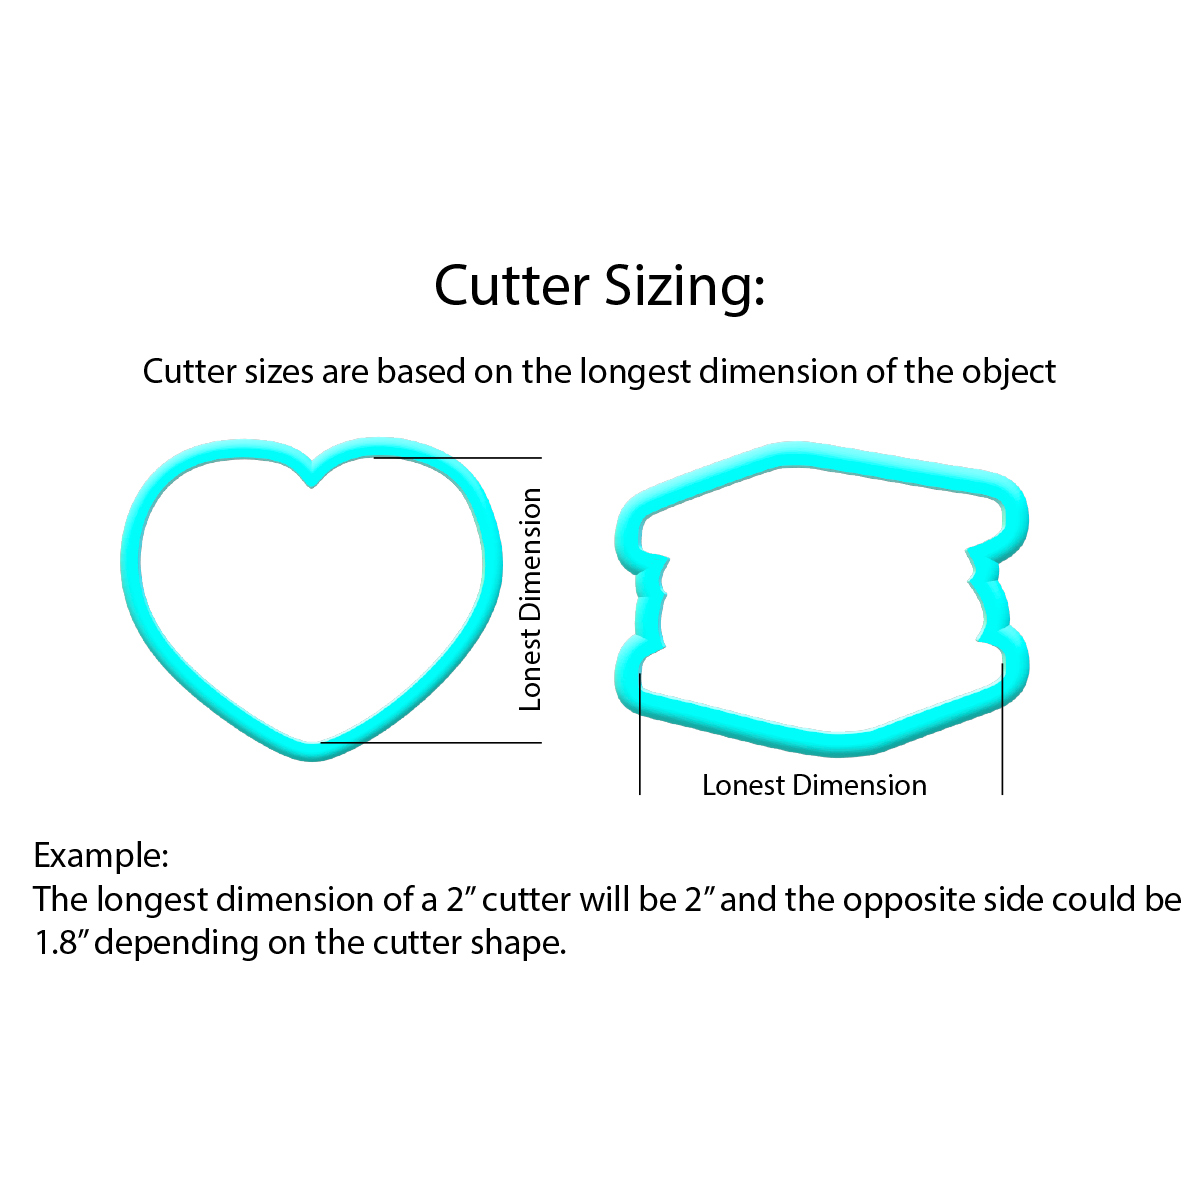 Bunny Squish Cookie Cutter | STL File